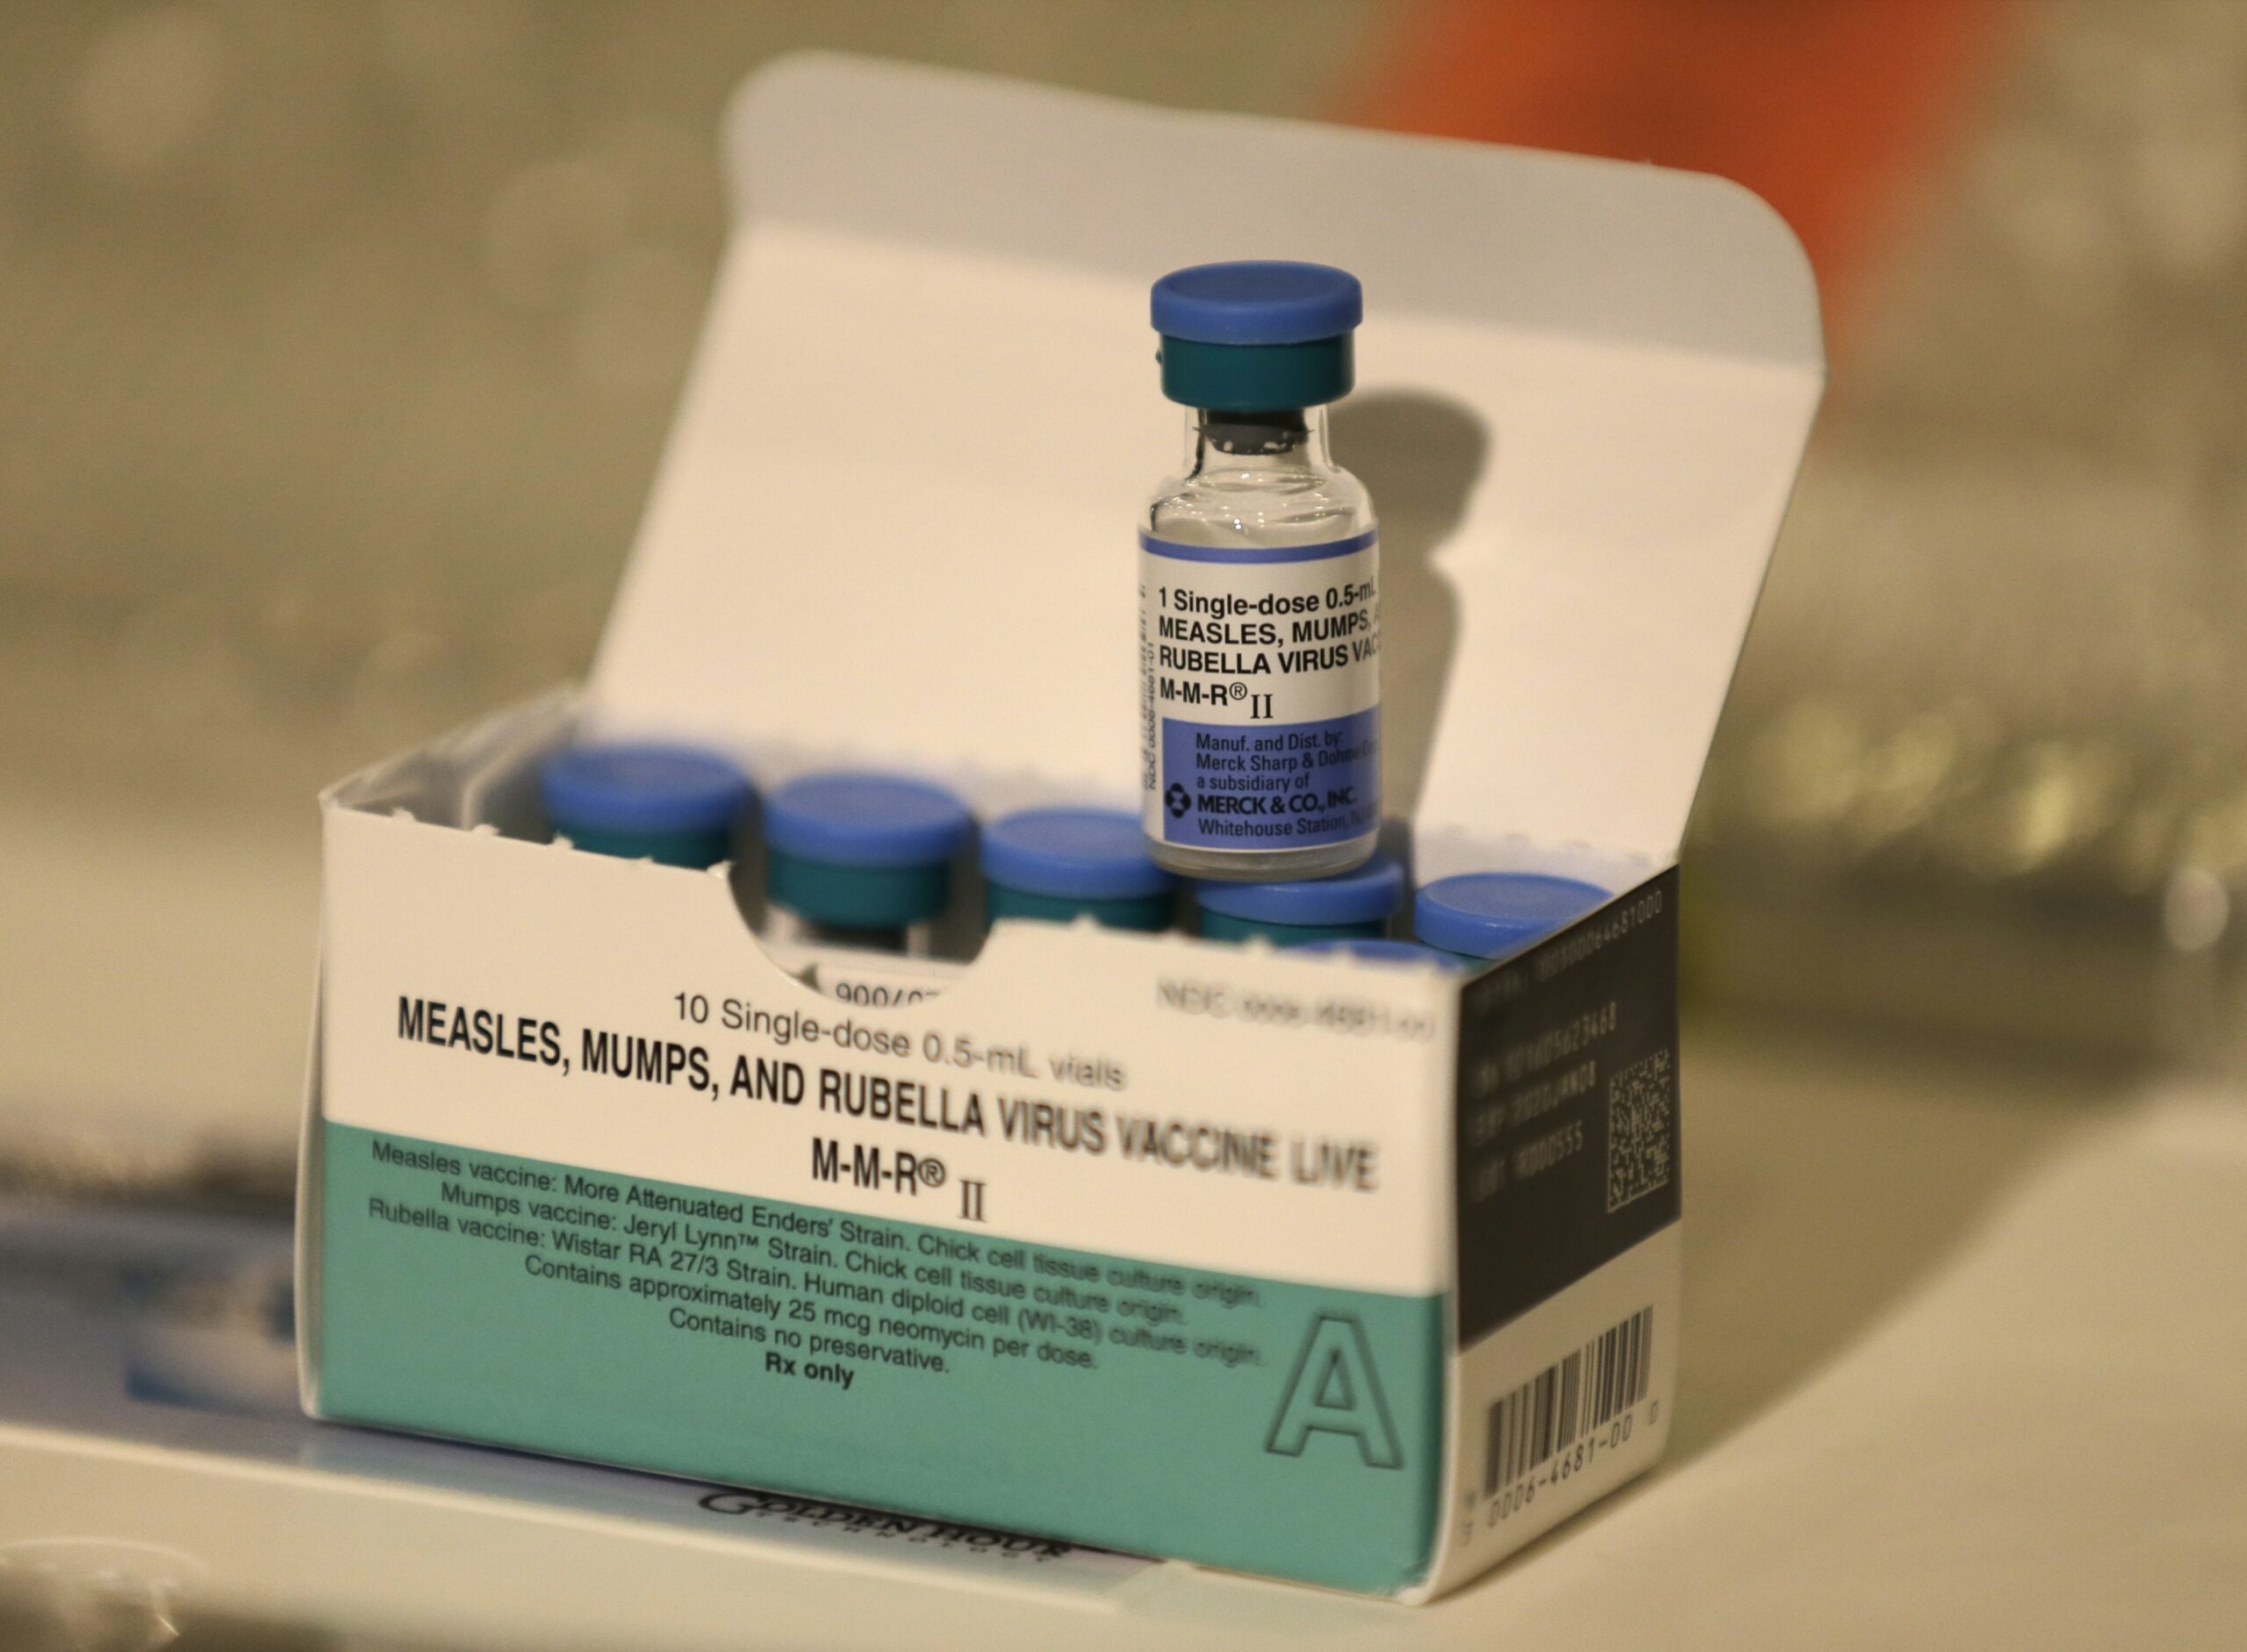 Measles, mumps and rubella vaccines